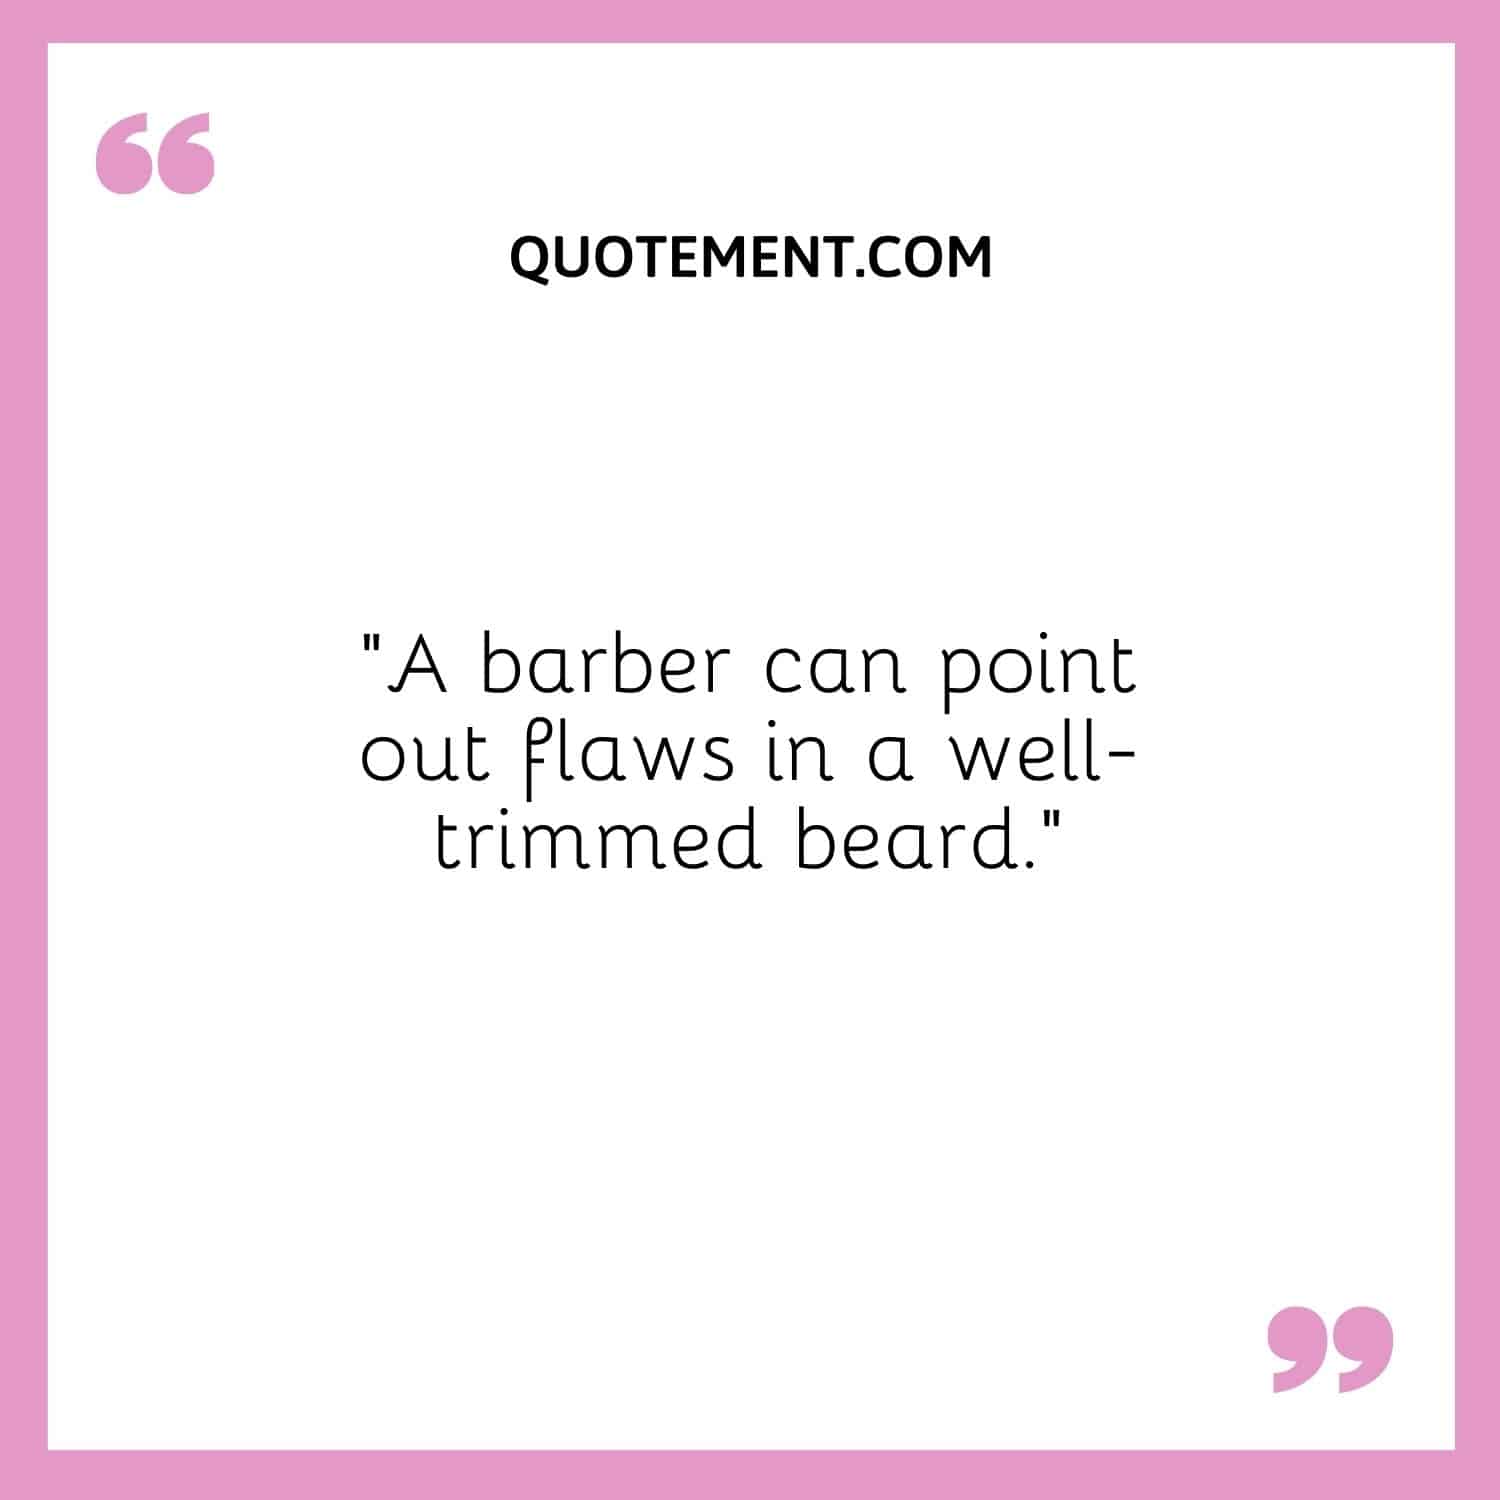 A barber can point out flaws in a well-trimmed beard.